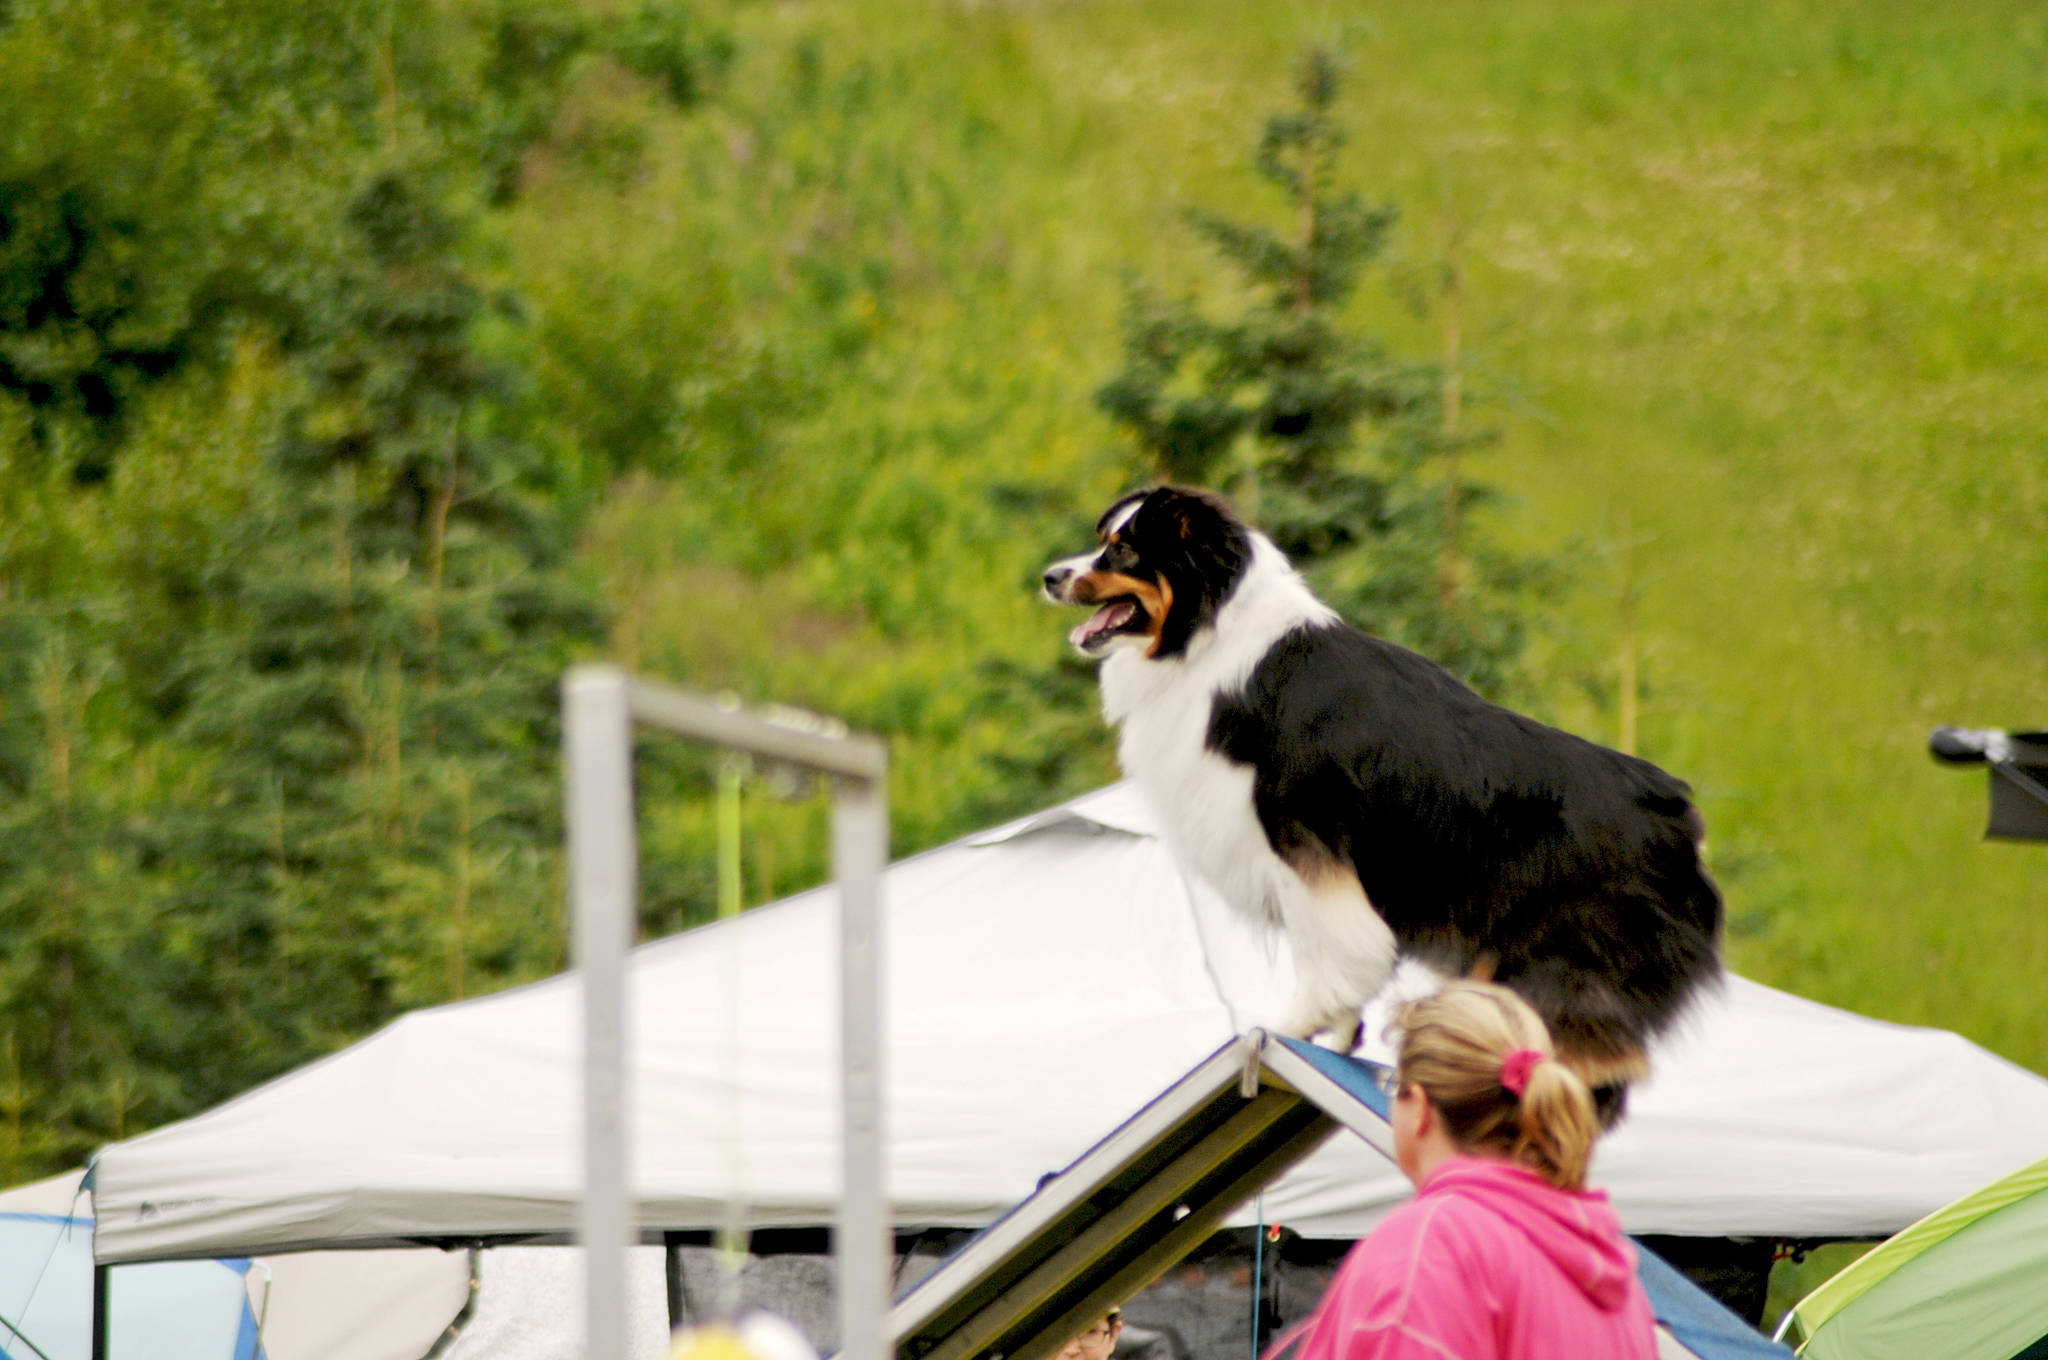 A dog climbs to the top of a ramp during an agility test at the Kenai Kennel Club’s annual dog show, obedience and agility trials on Saturday, July 14, 2018 in Soldotna, Alaska. Dog owners come from all over the state to take part in the events each year. (Photo by Elizabeth Earl/Peninsula Clarion)